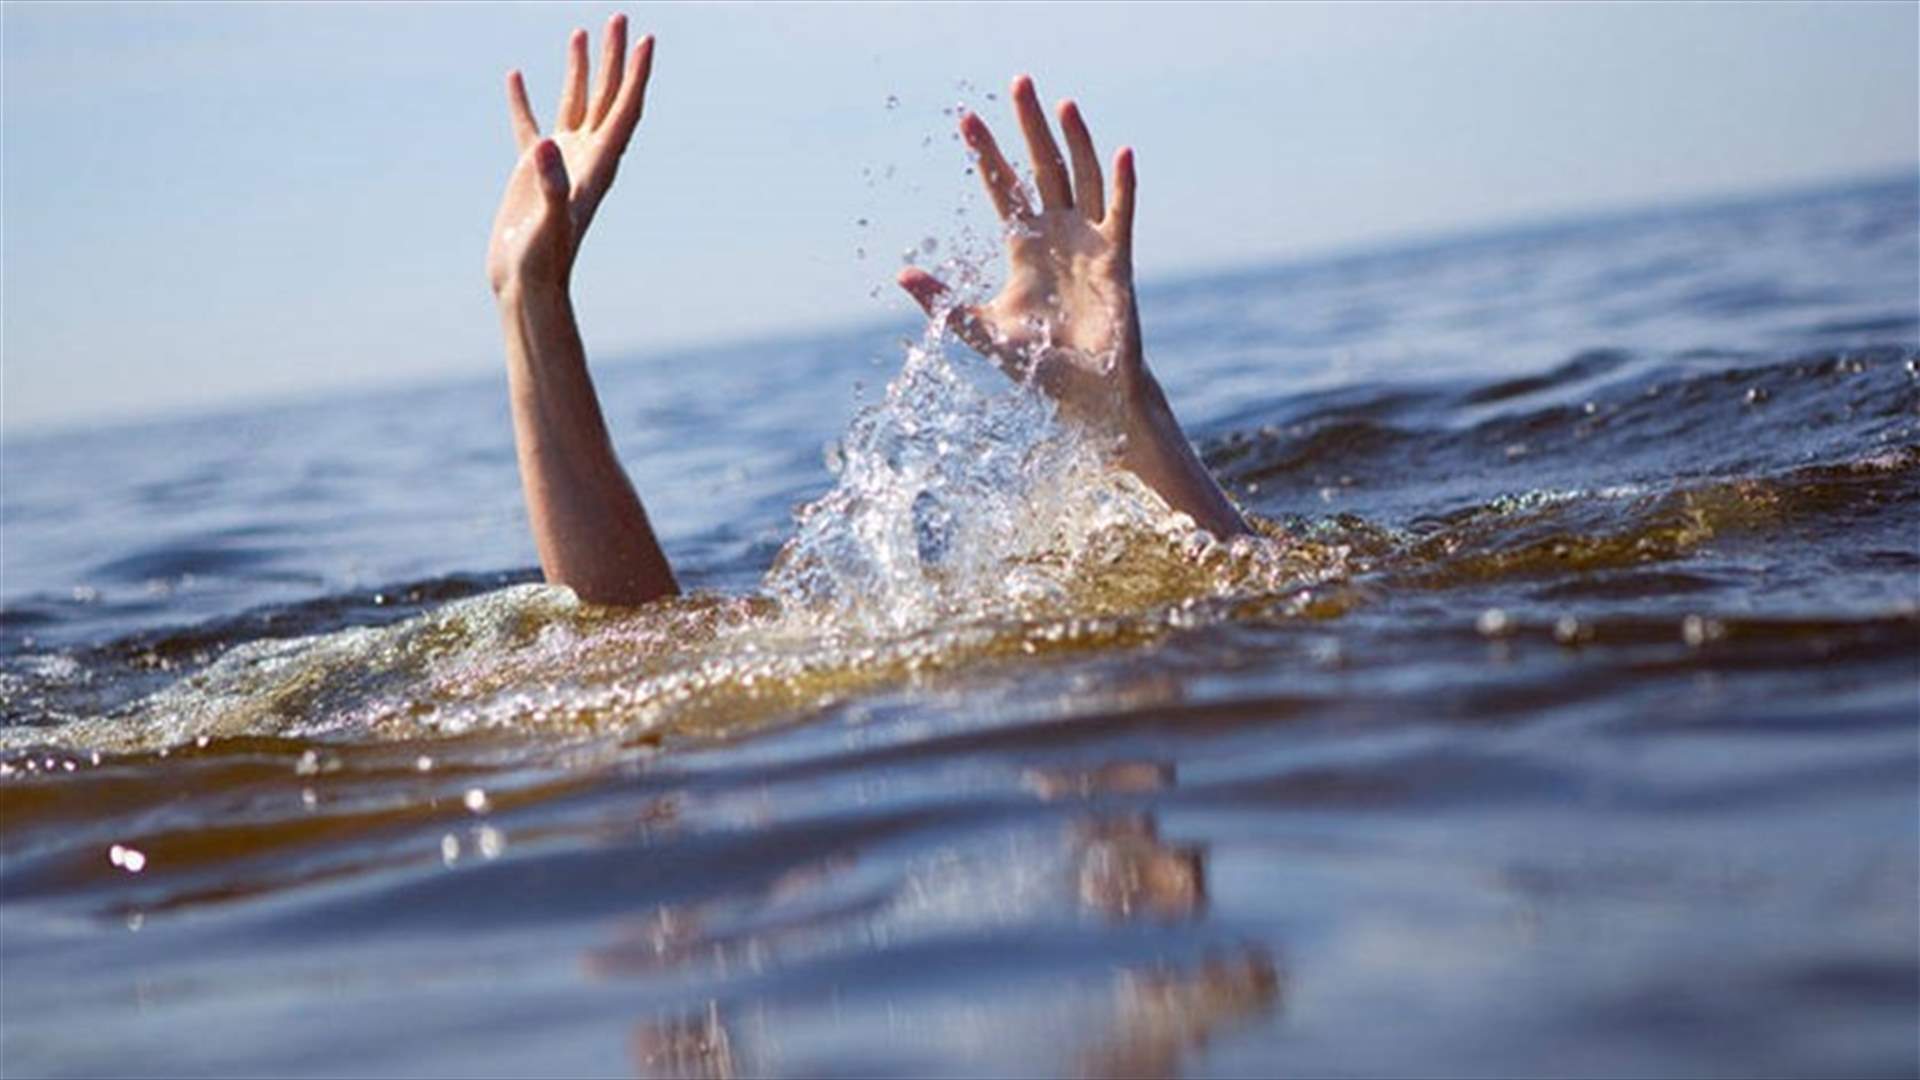 Lebanese national drowns while taking pictures near River